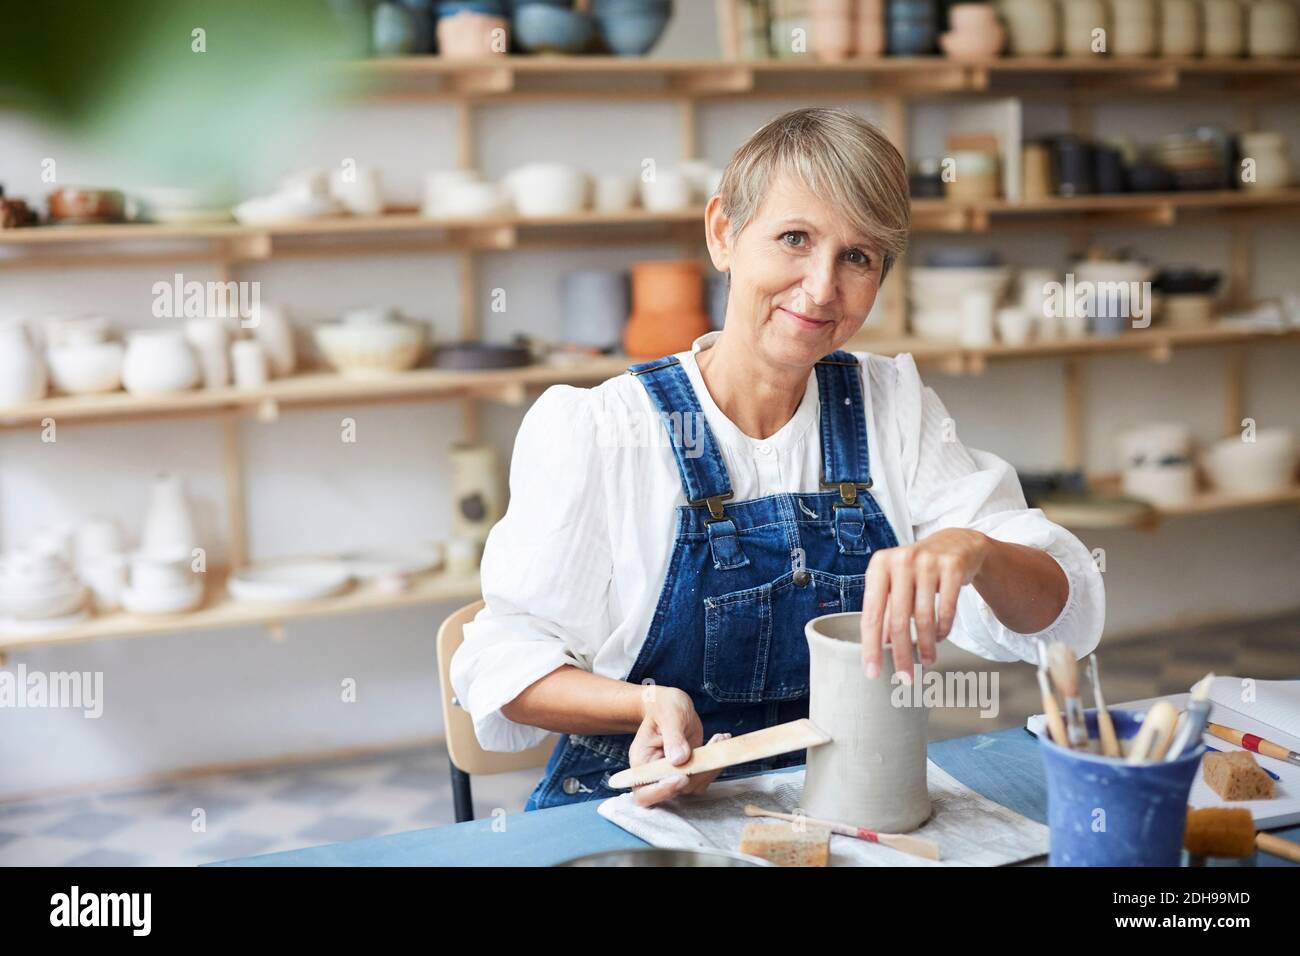 Portrait of smiling mature woman with earthenware at table in art studio Stock Photo